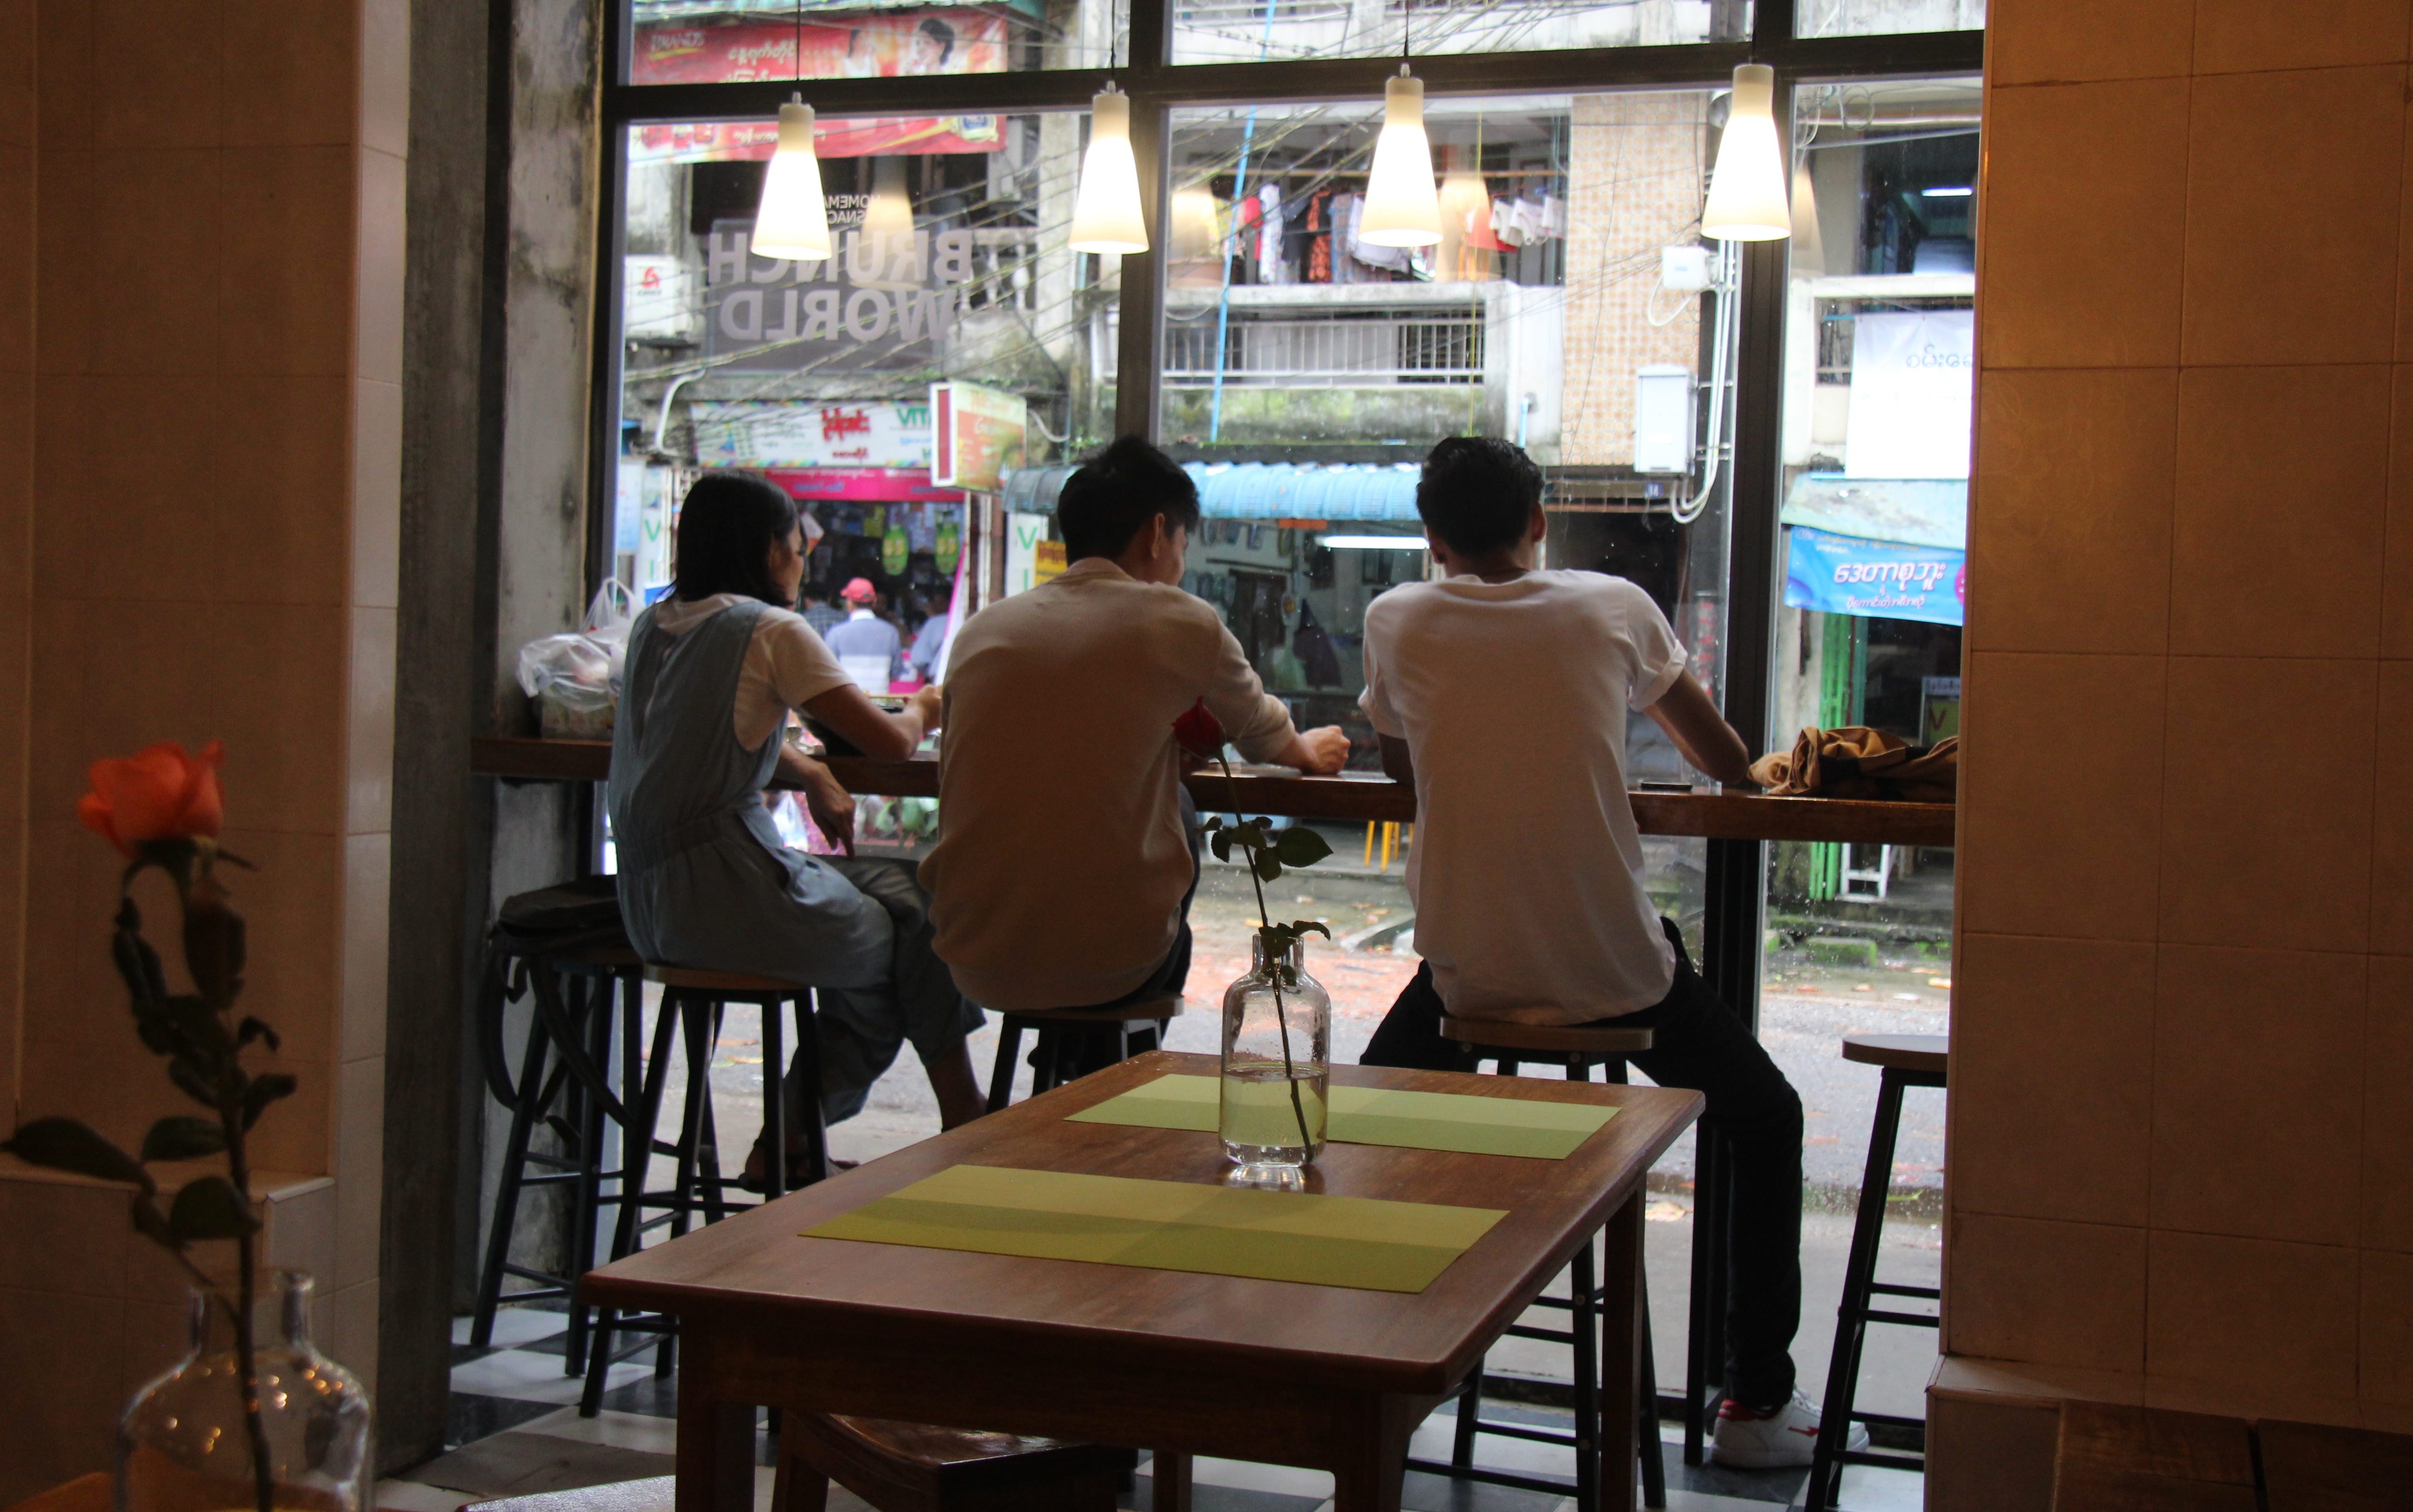 Customers at Working House Café.